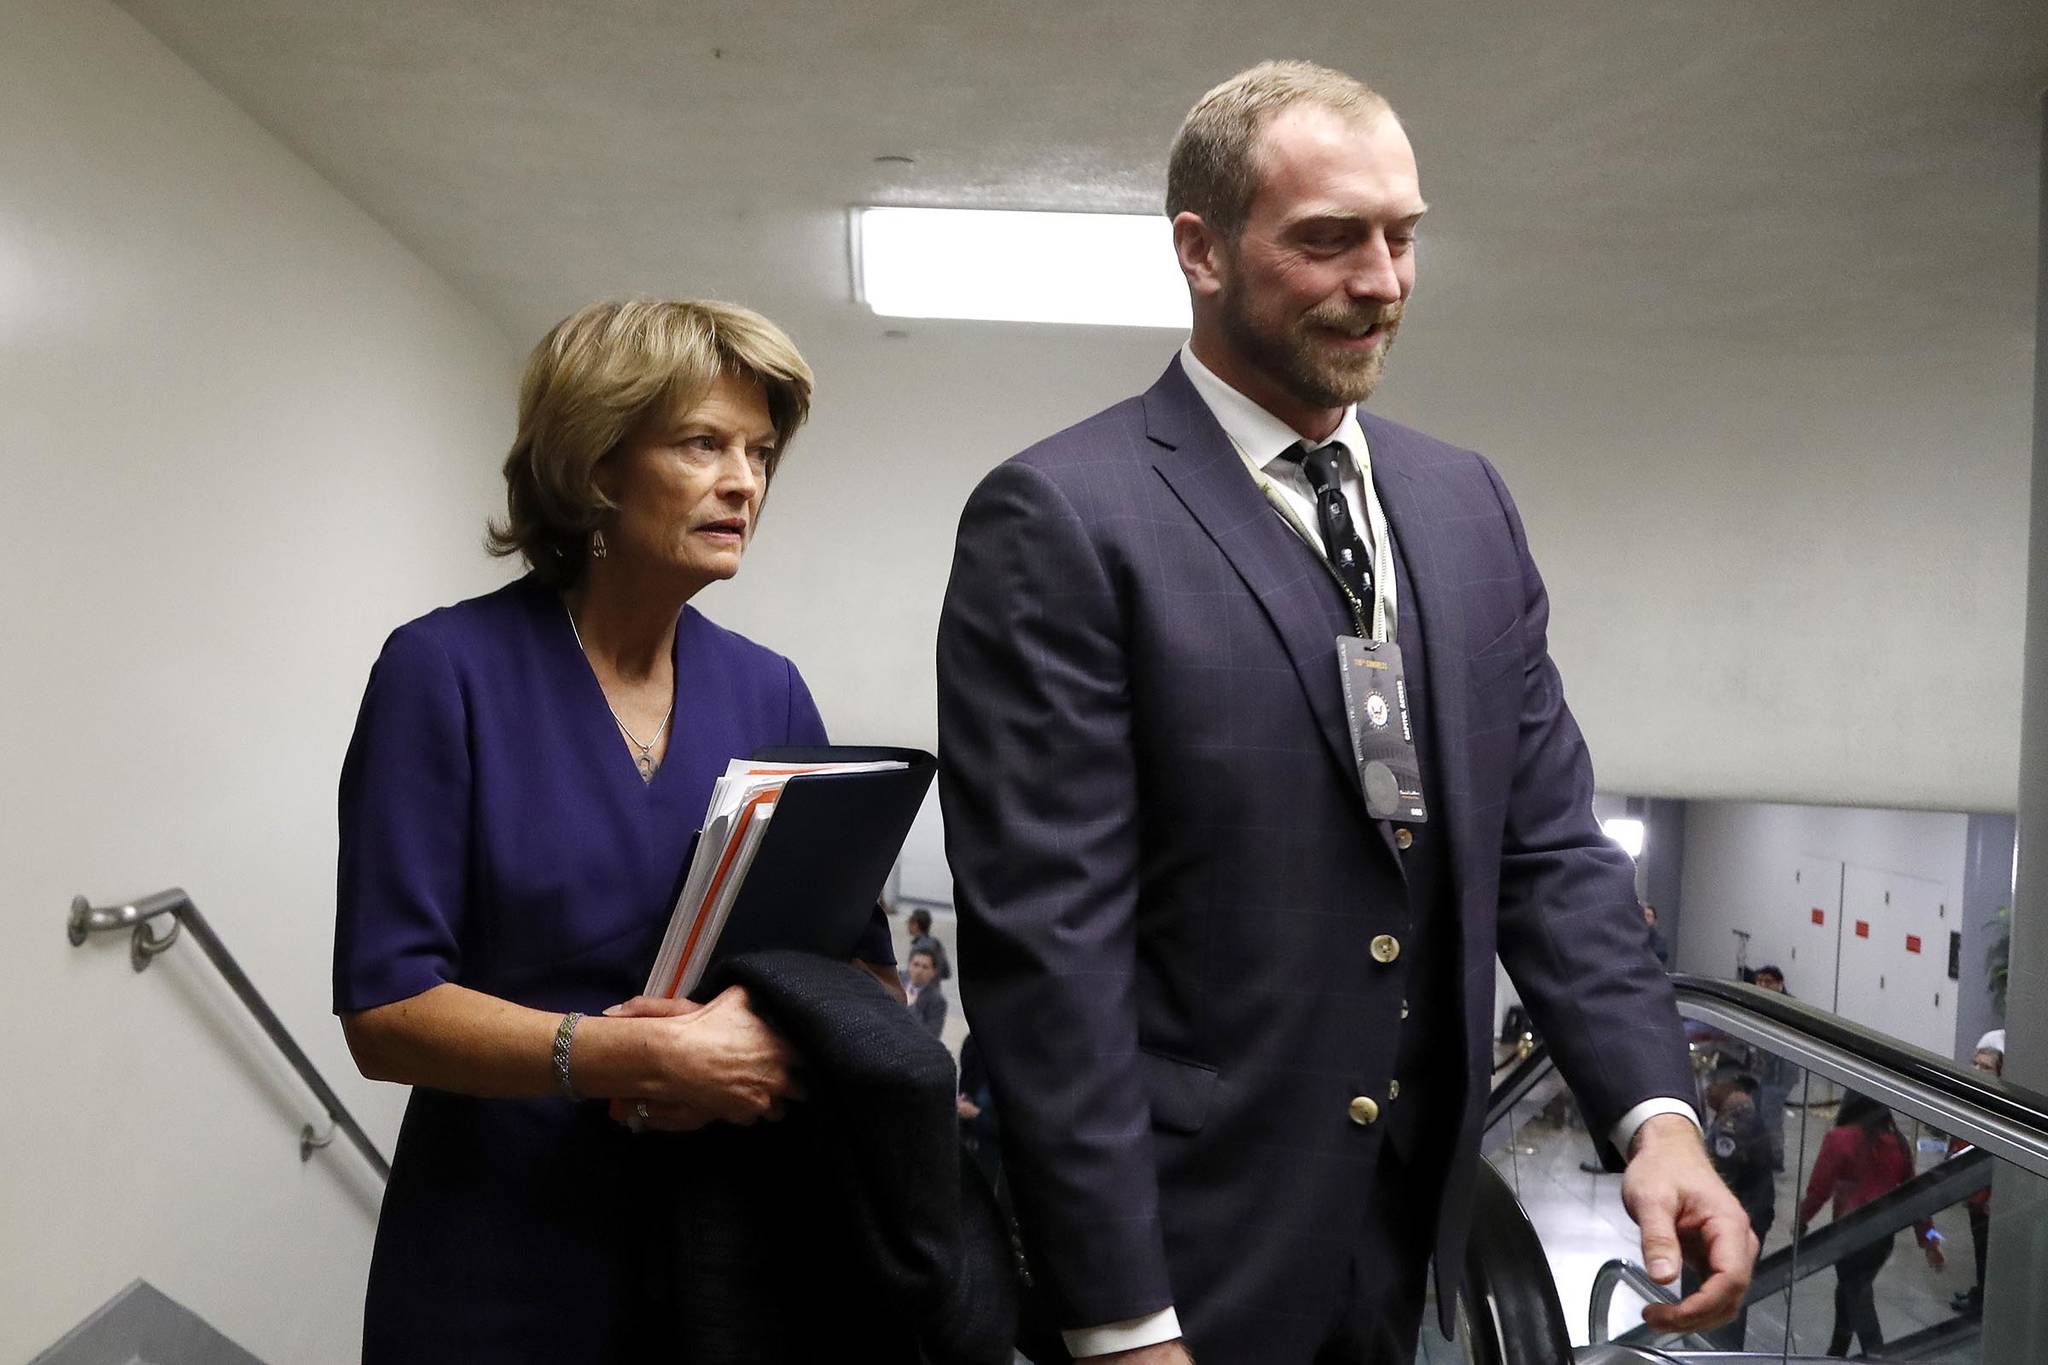 Sen. Lisa Murkowski, R-Alaska, left, arrives on Capitol Hill in Washington, Thursday during the impeachment trial of President Donald Trump on charges of abuse of power and obstruction of Congress. (AP Photo | Julio Cortez)